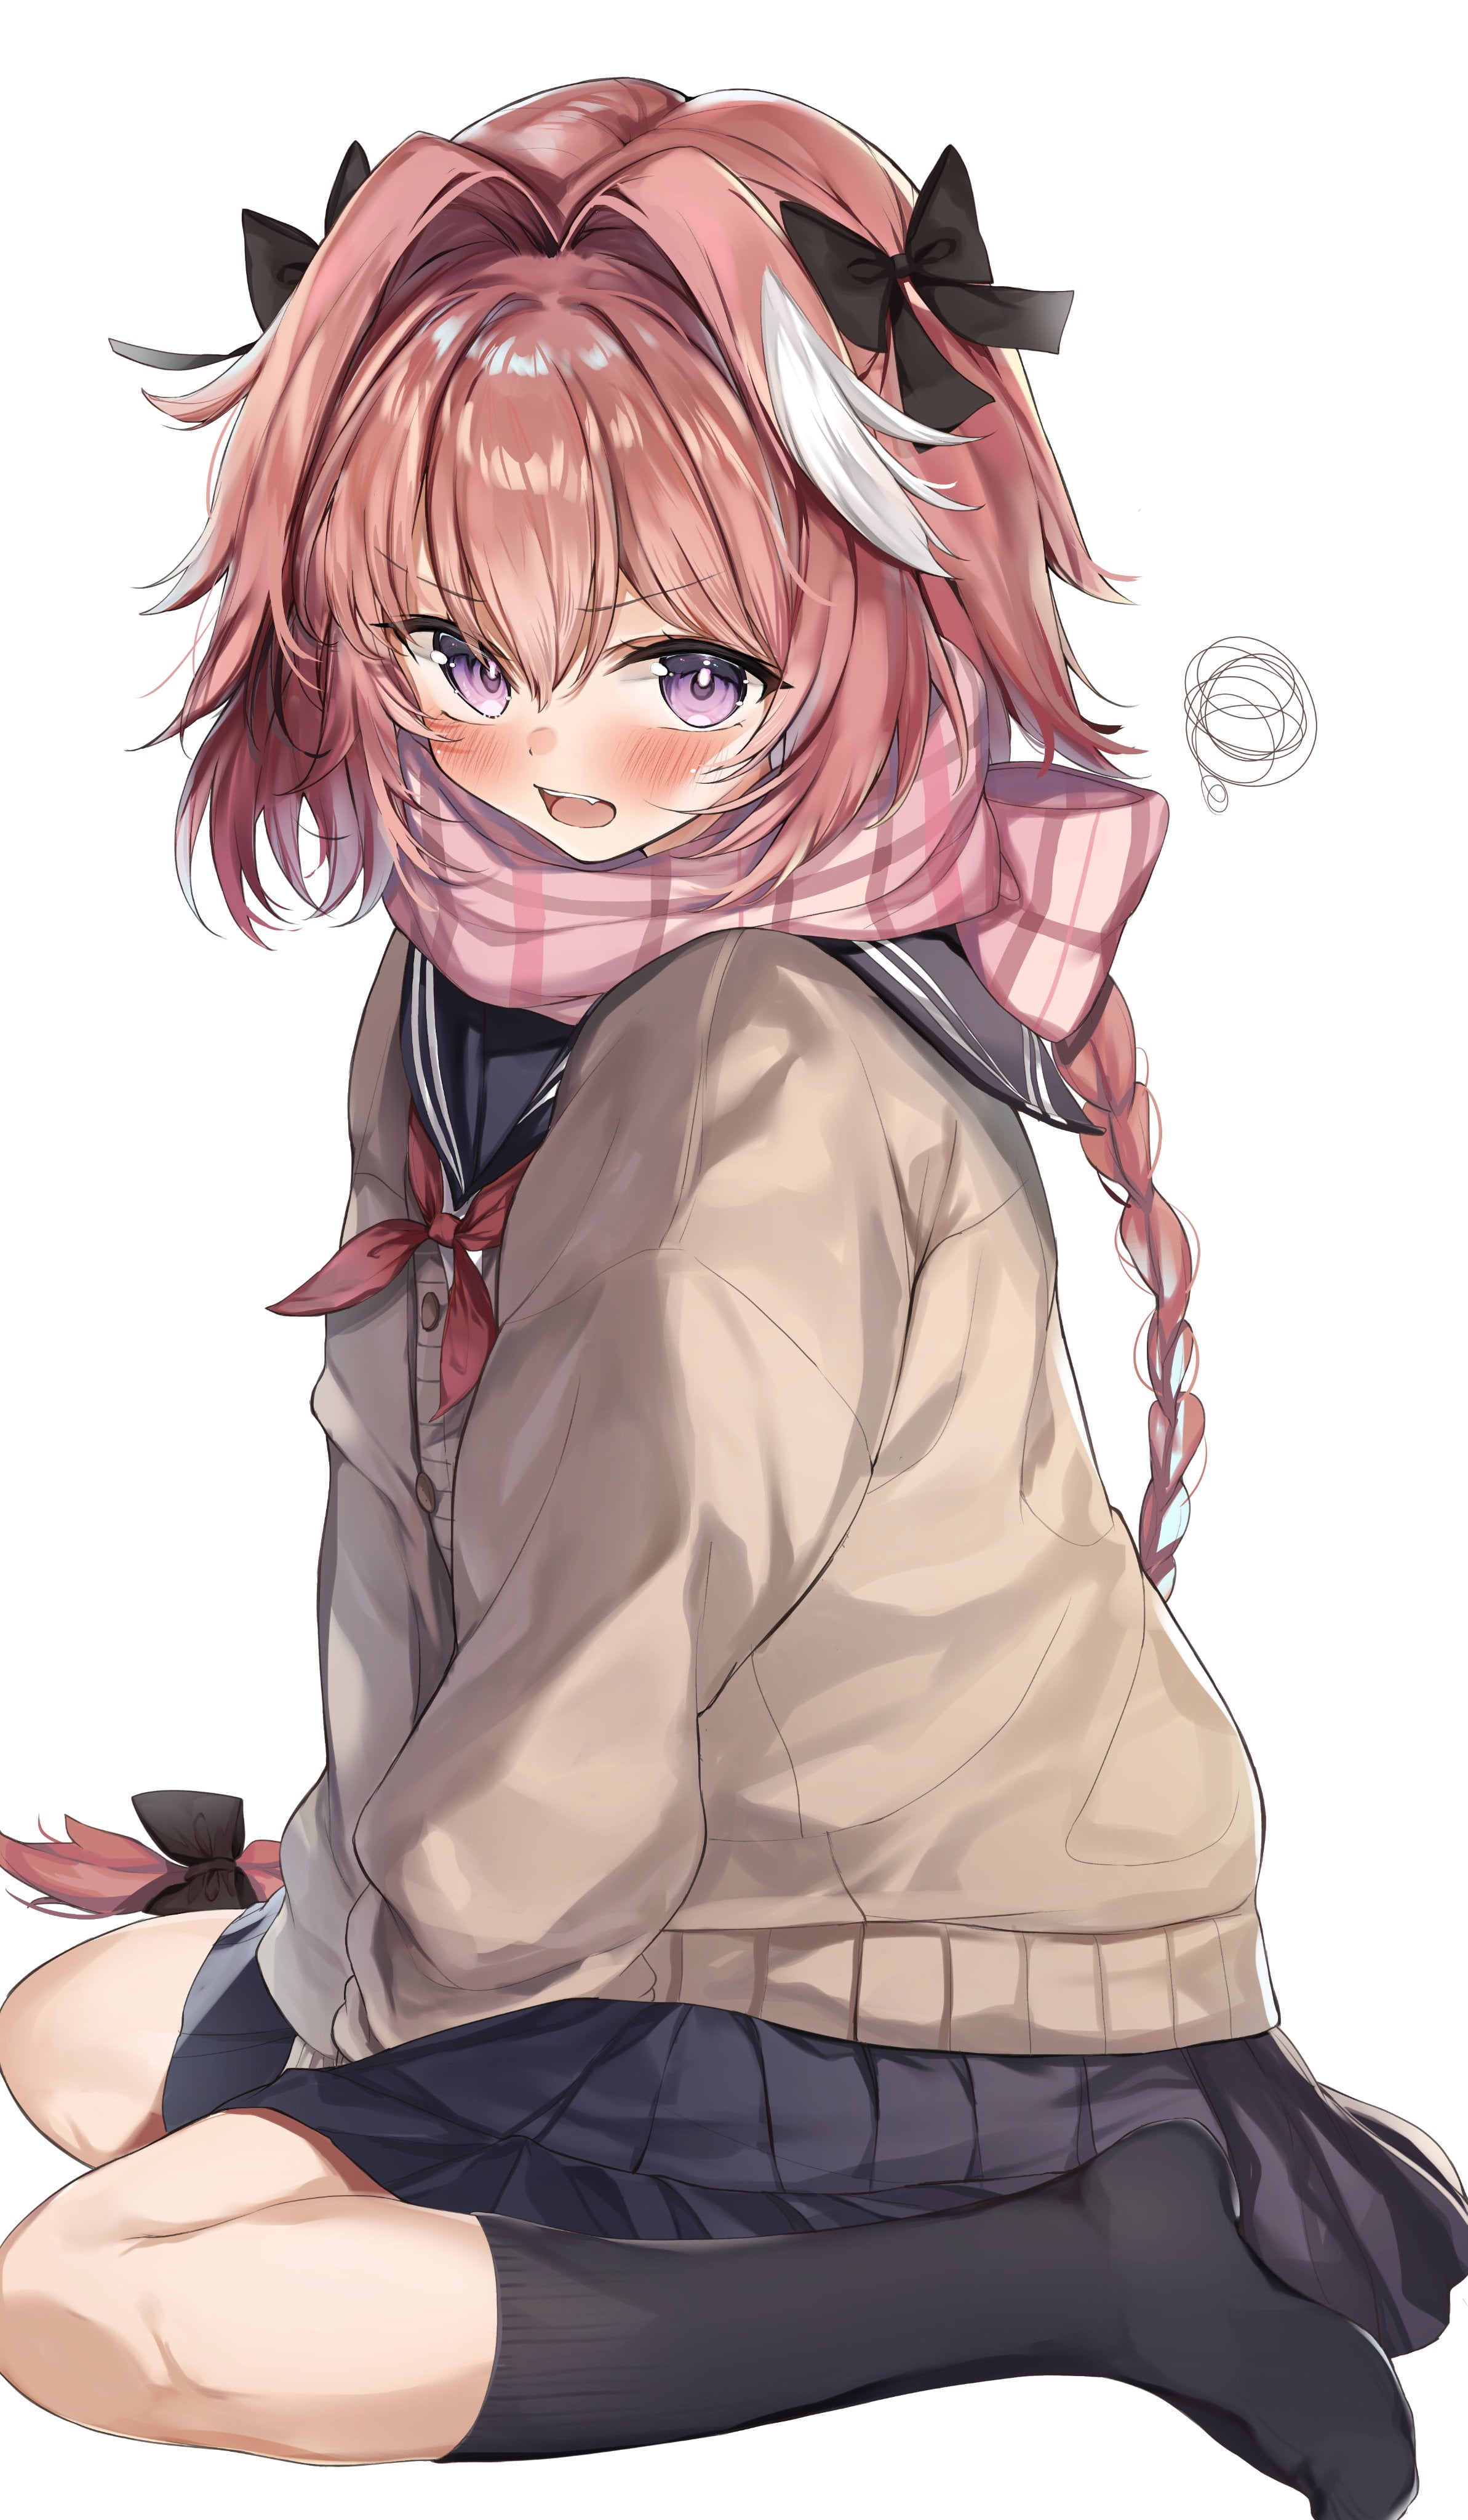 Fate Series, FGO, Fate/Apocrypha, bicolored hair, open mouth